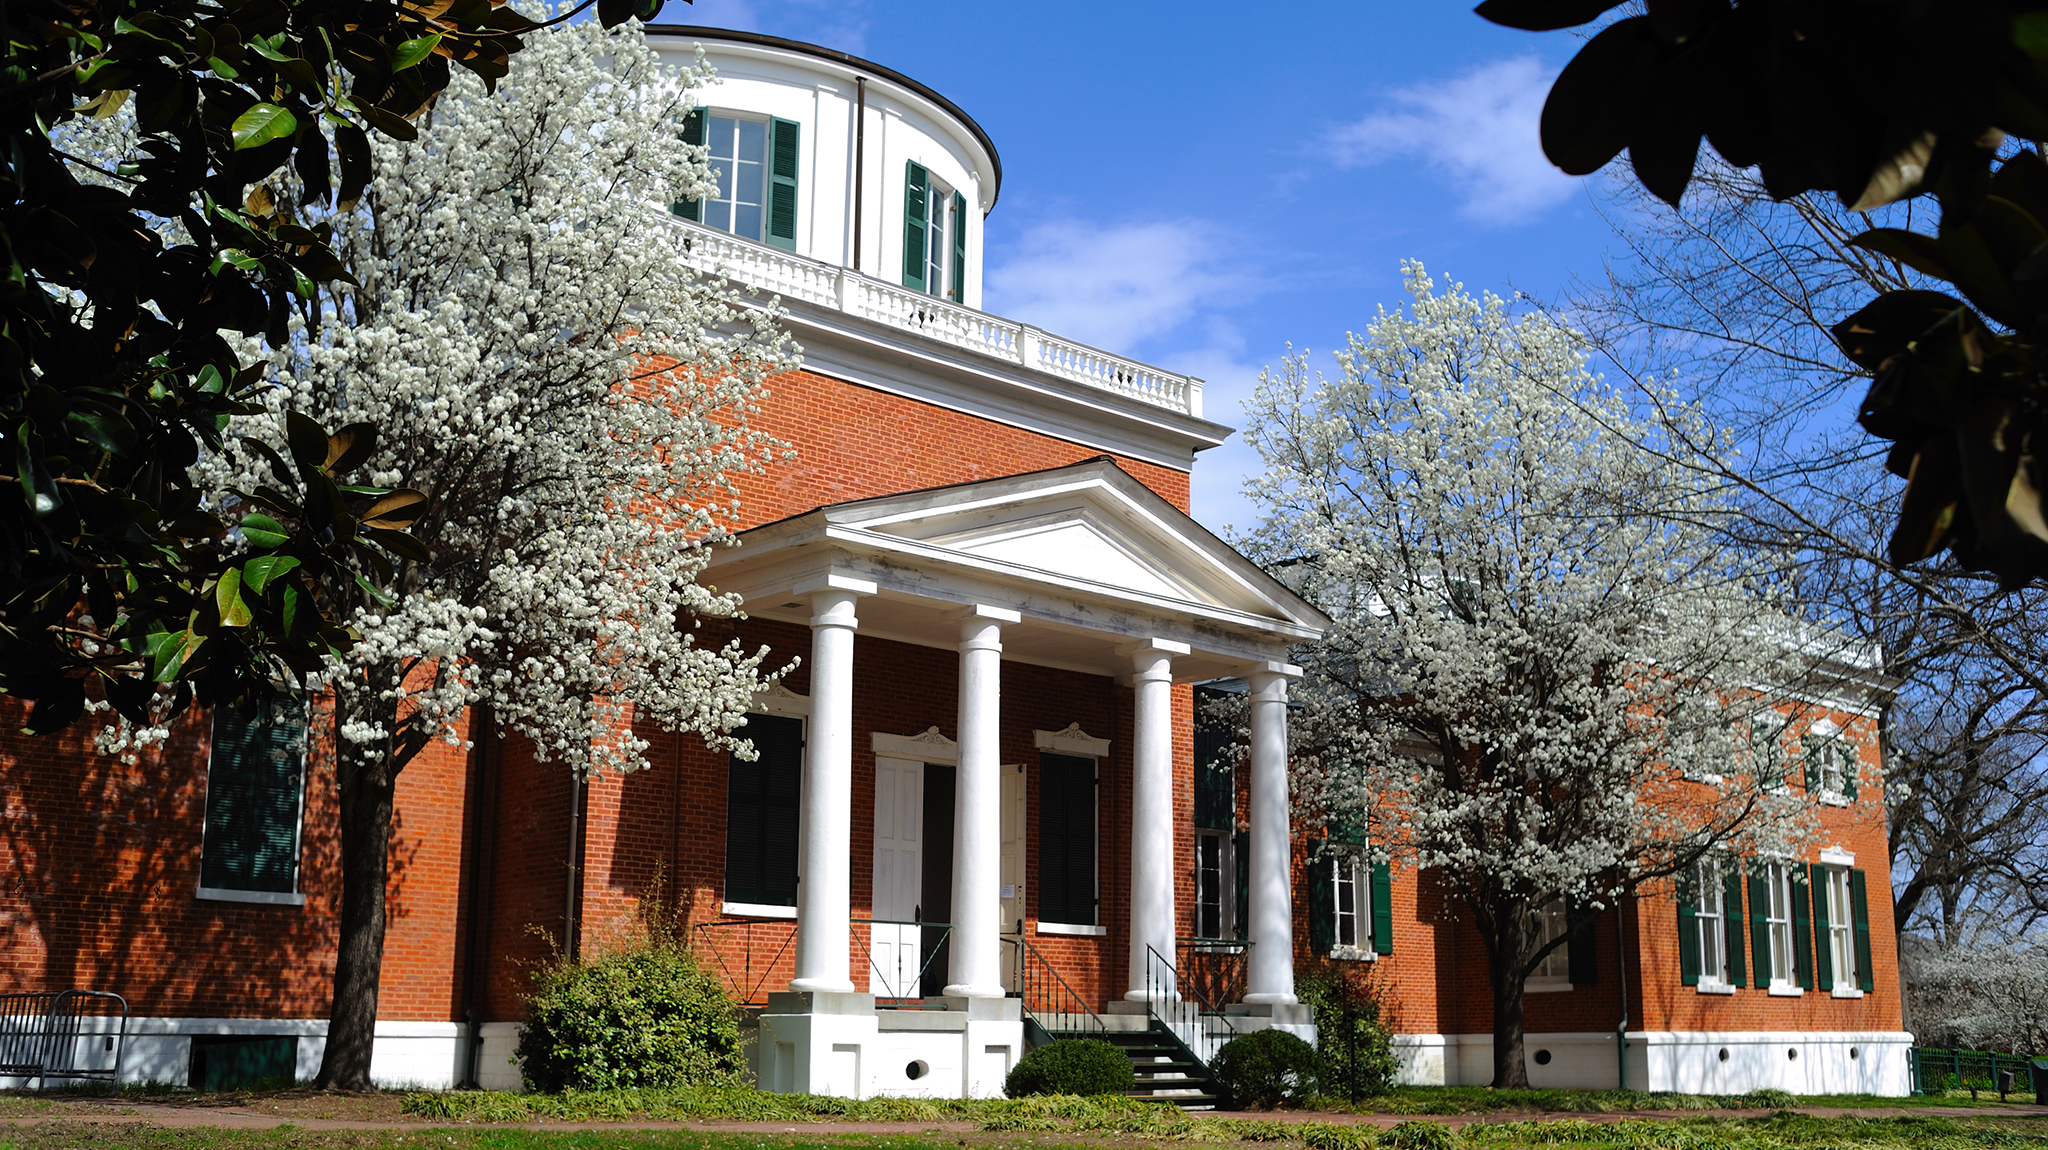 Barnard Observatory, The Grove, University of Mississippi, Oxford, MS (photo from Olemiss.edu)